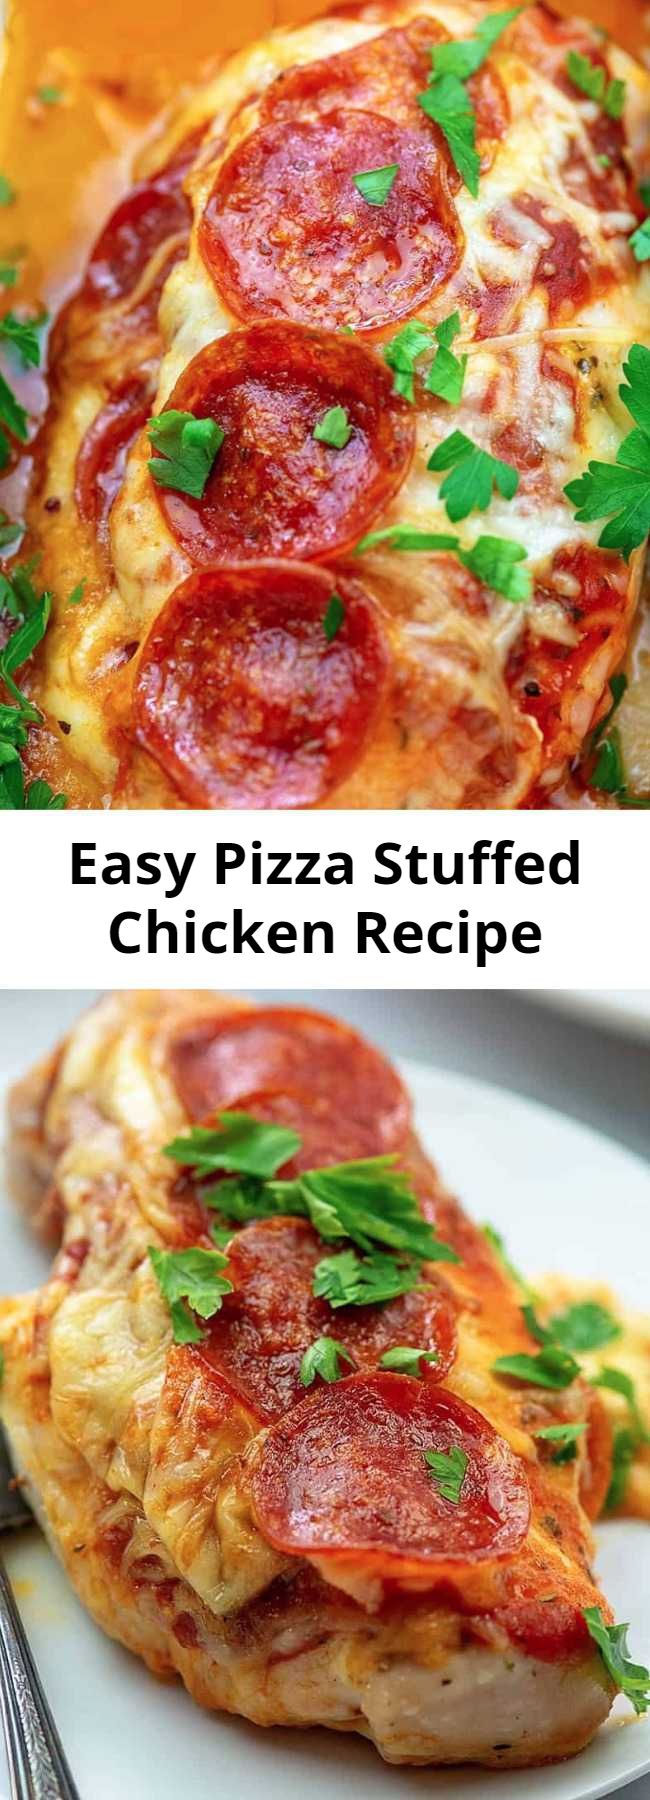 Easy Pizza Stuffed Chicken Recipe - If you're craving pizza, this stuffed chicken recipe will do the trick nicely! We use pepperoni since that's what we love on our pizza, but feel free to add a few of your favorite toppings! This quickly became one of the most requested recipes by my kids and I love it because it’s low carb and super easy prep. #chicken #lowcarb #keto #pizza